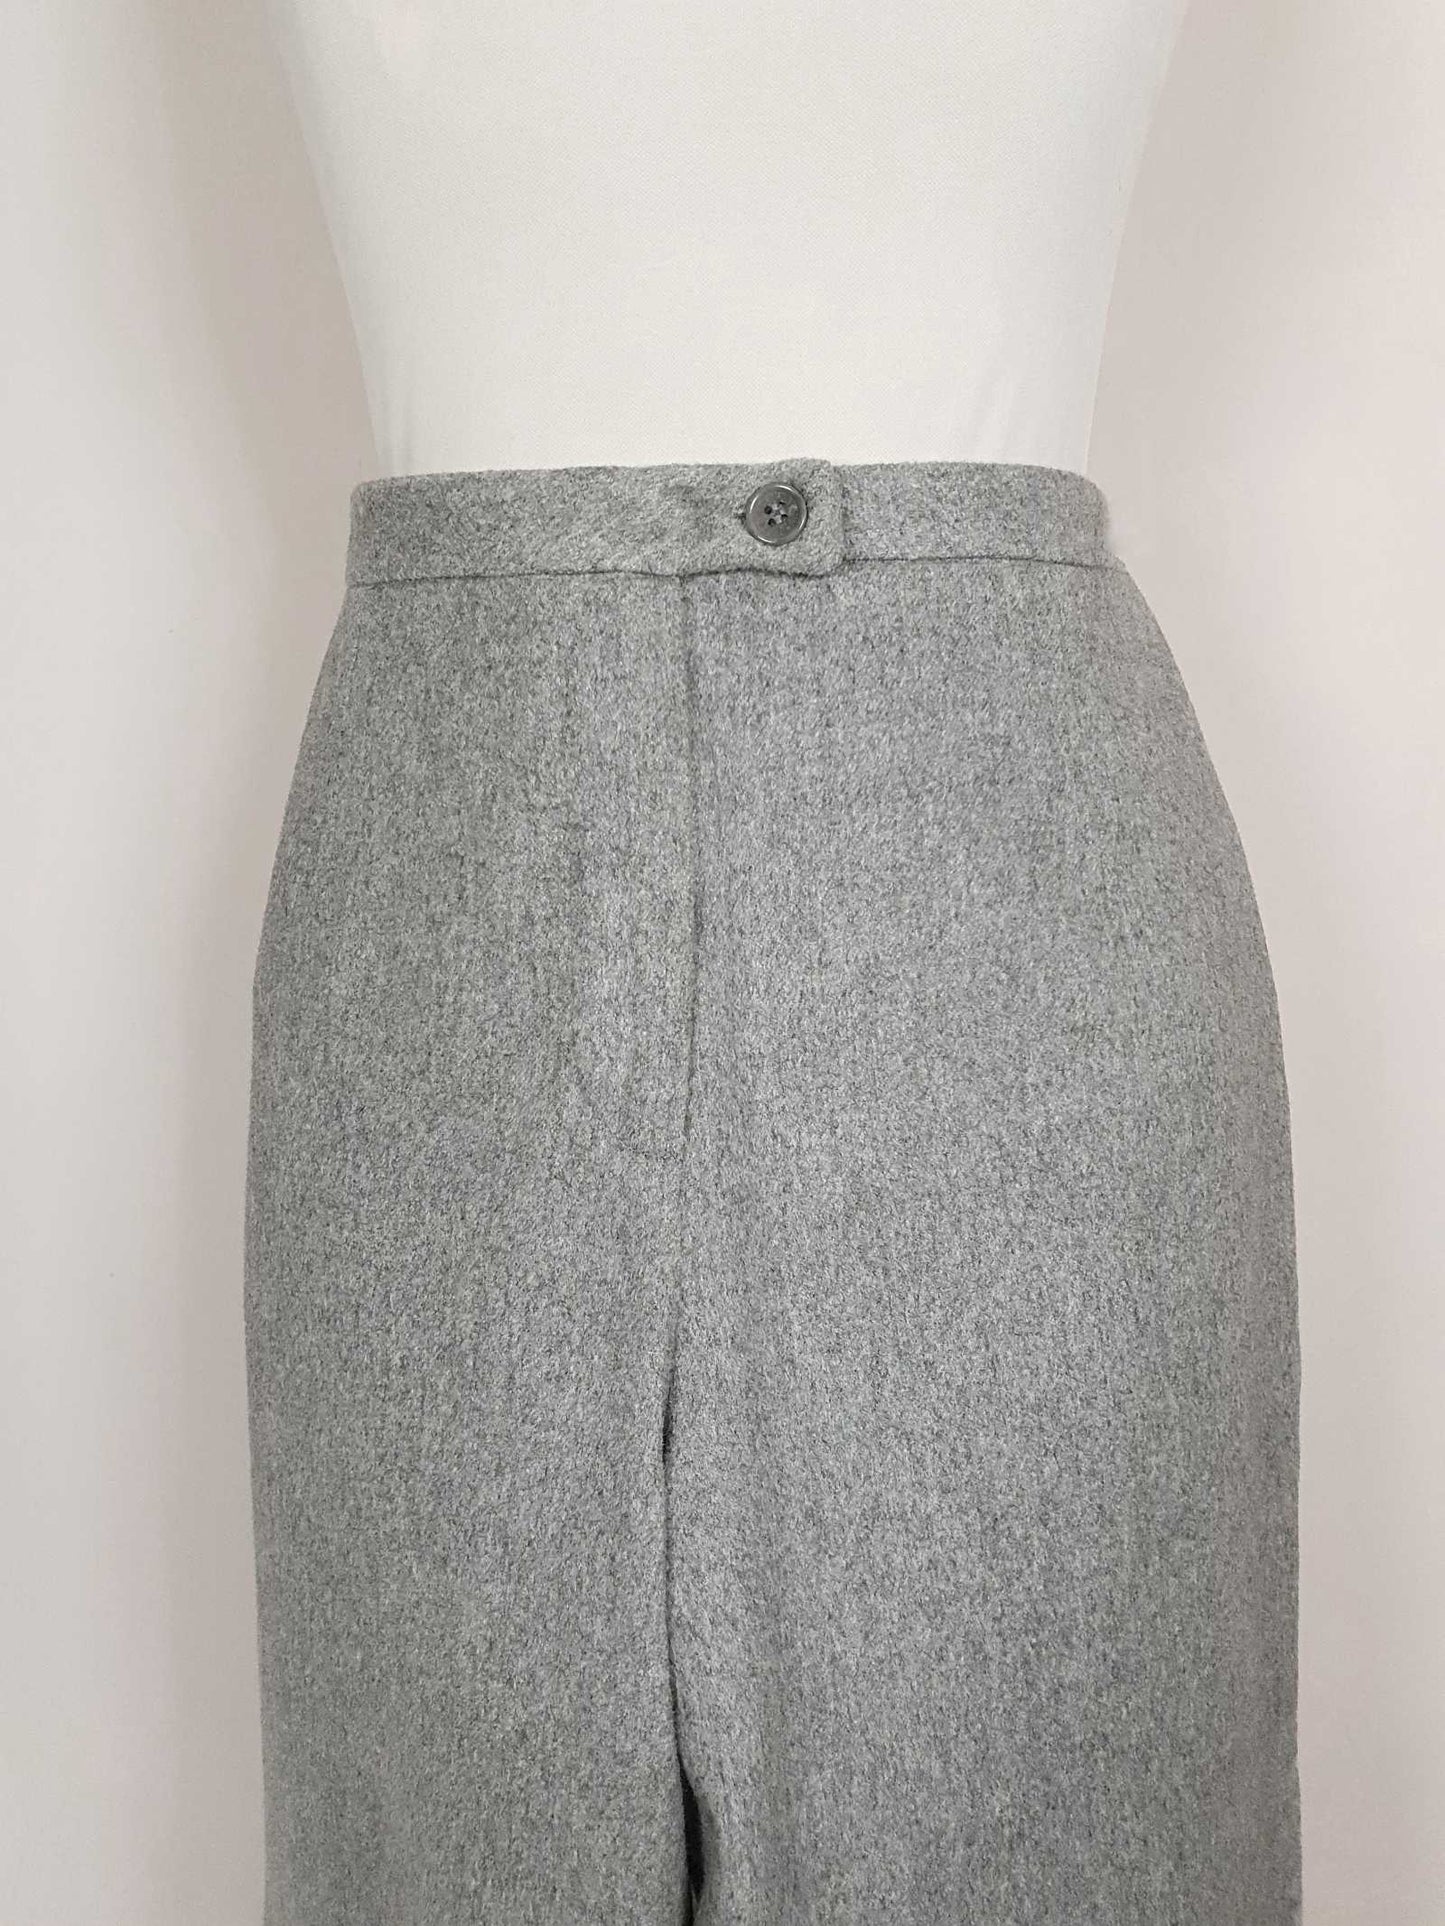 Vintage Mulberry Grey Silk Wool Trousers 1990s Size 14 Wide Leg